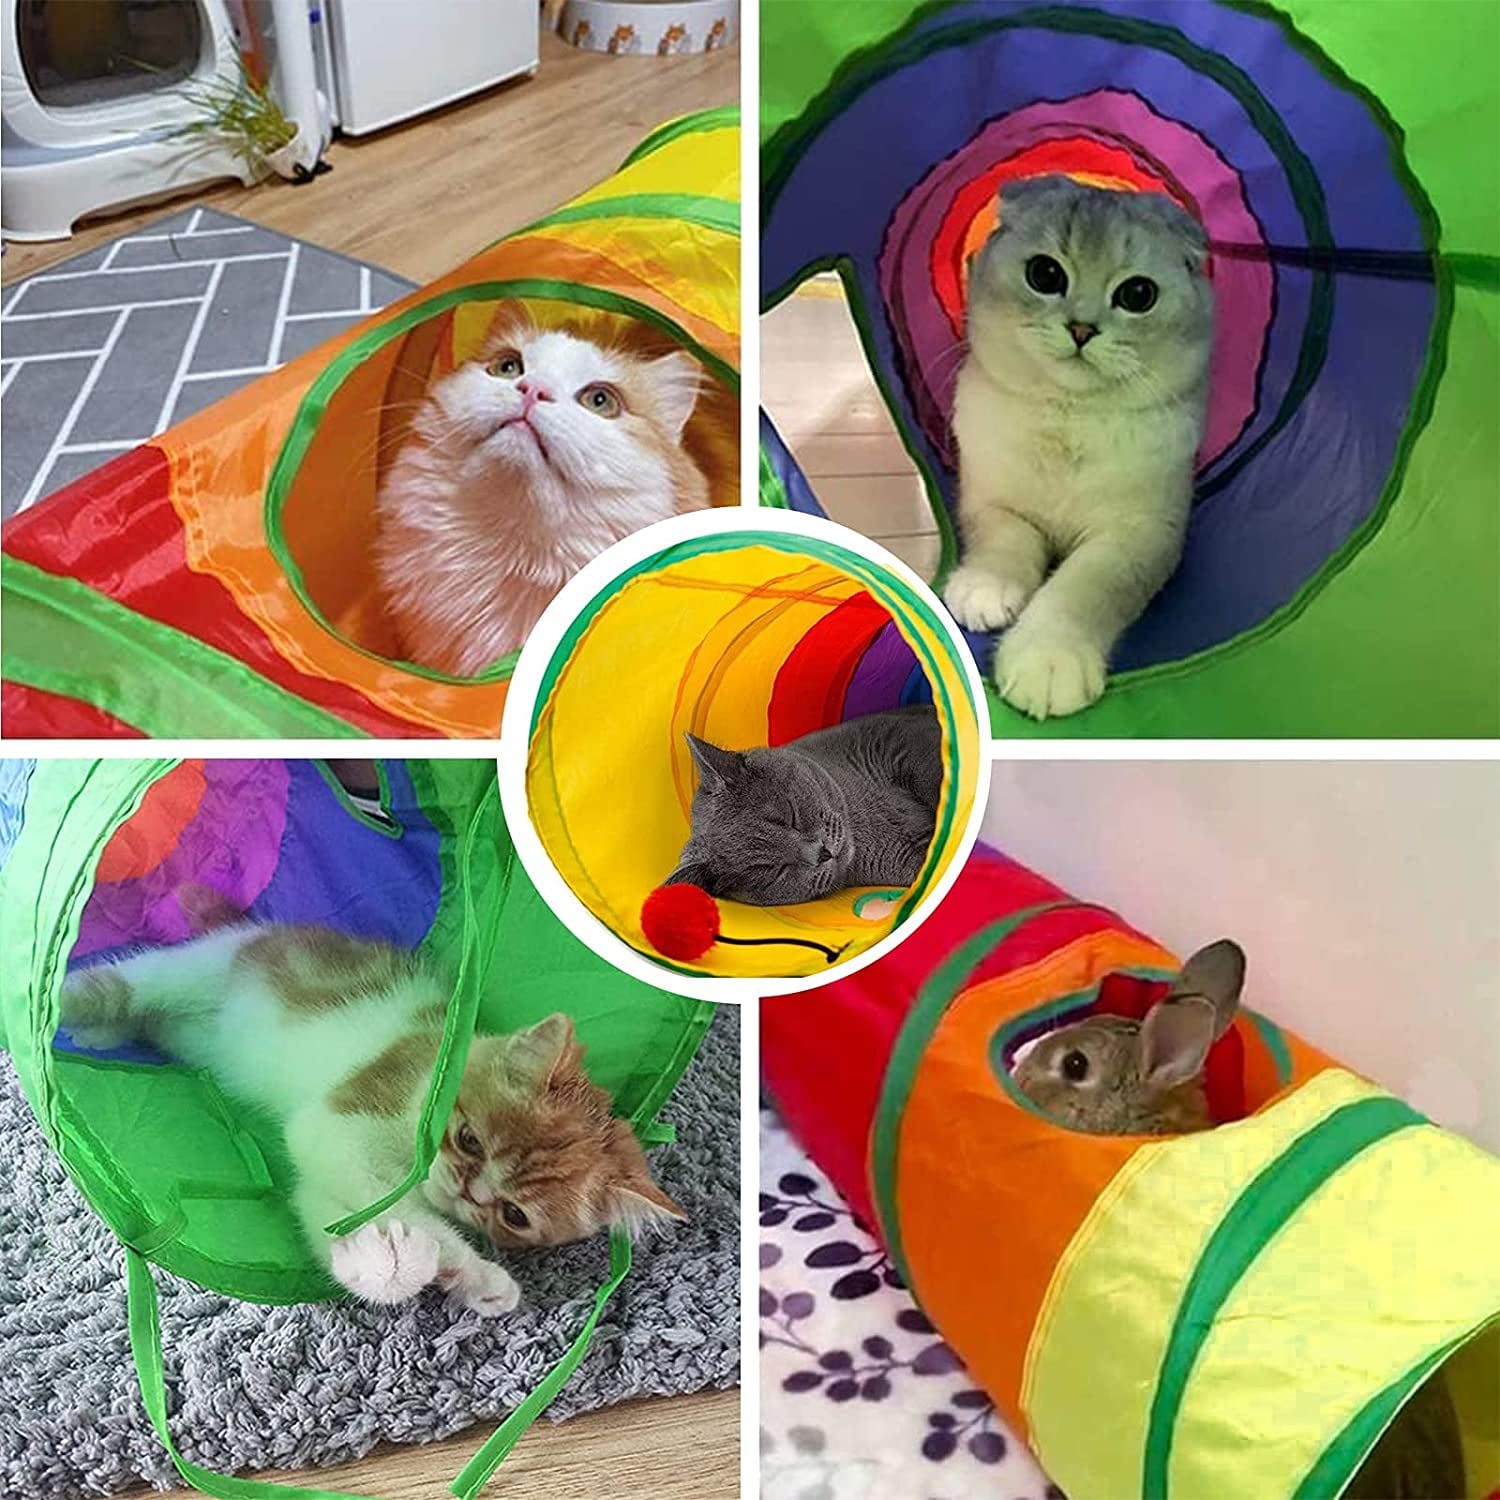 Ingenious Fun Cat Toys Eco-Friendly Educational Pet Toys Rainbow Cat Tunnel for Cats Indoor and Outdoor Games 45.289.84in 2 Holes Collapsible Portable Dailyfun Cat Tunnel Tube